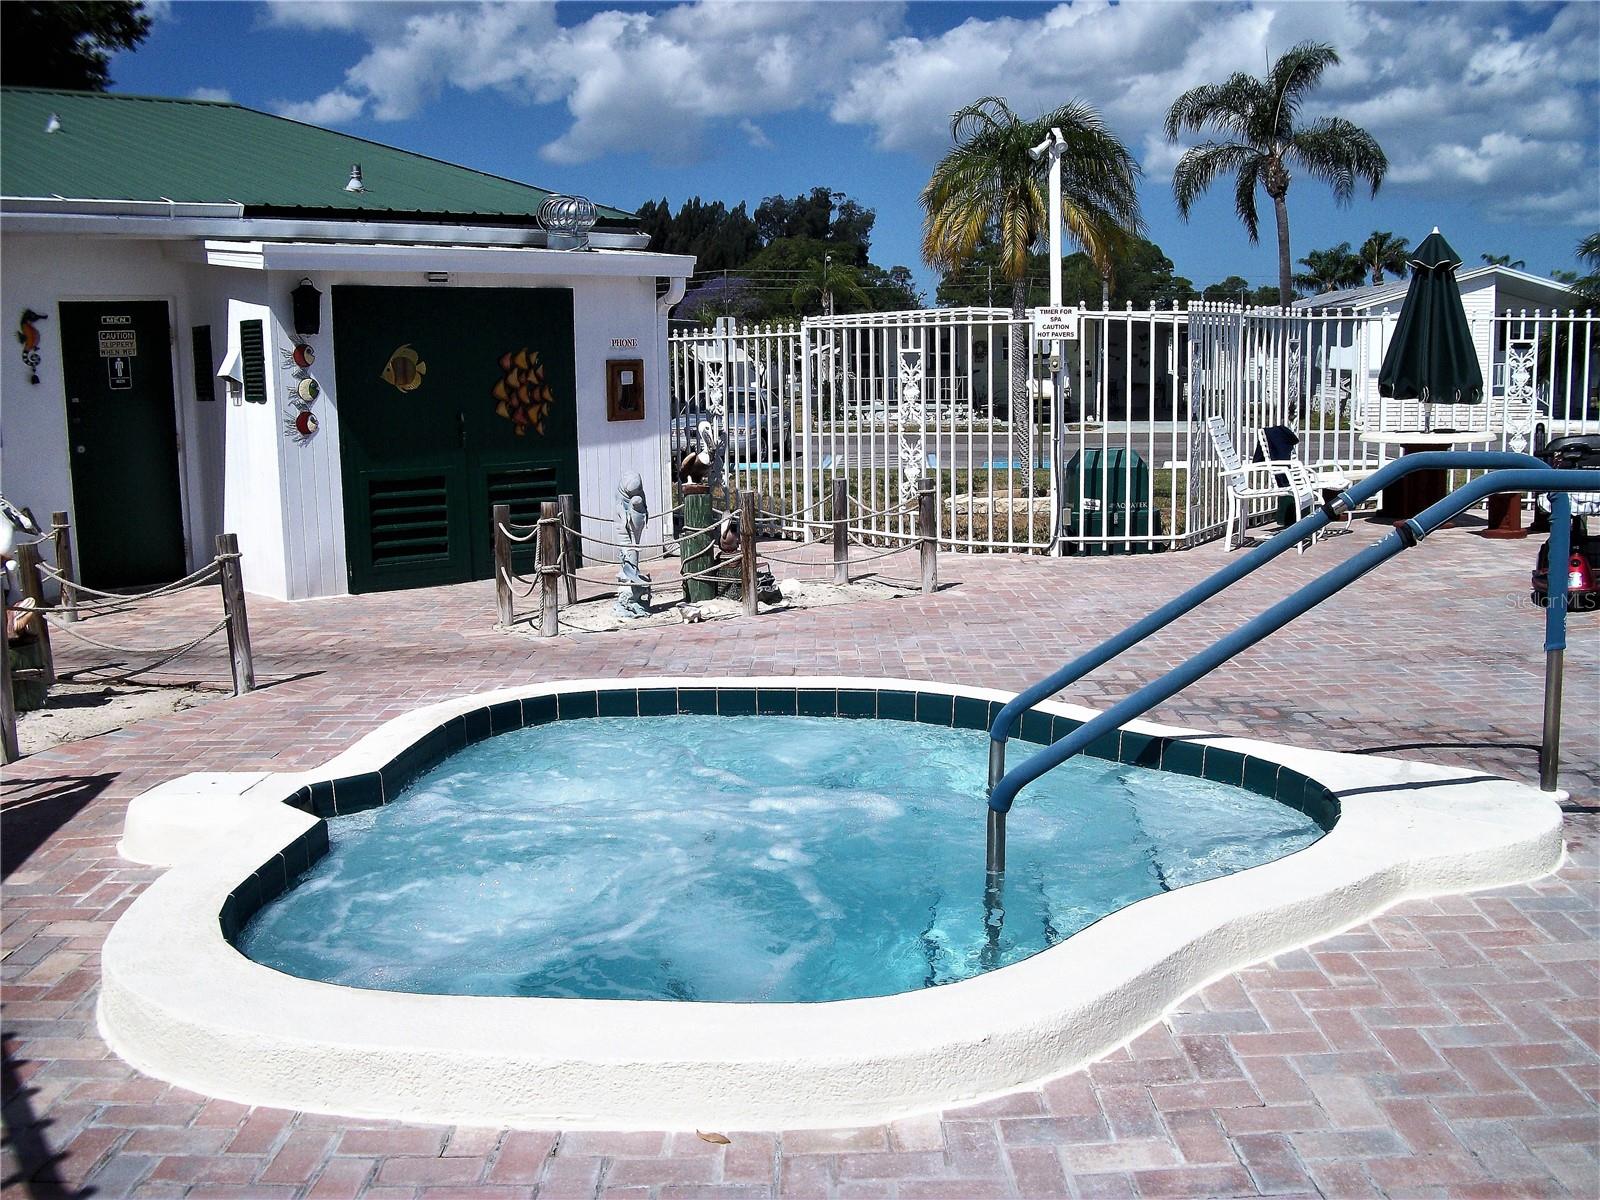 Pool area offers a spa to melt away the stresses of your day or to just relax.